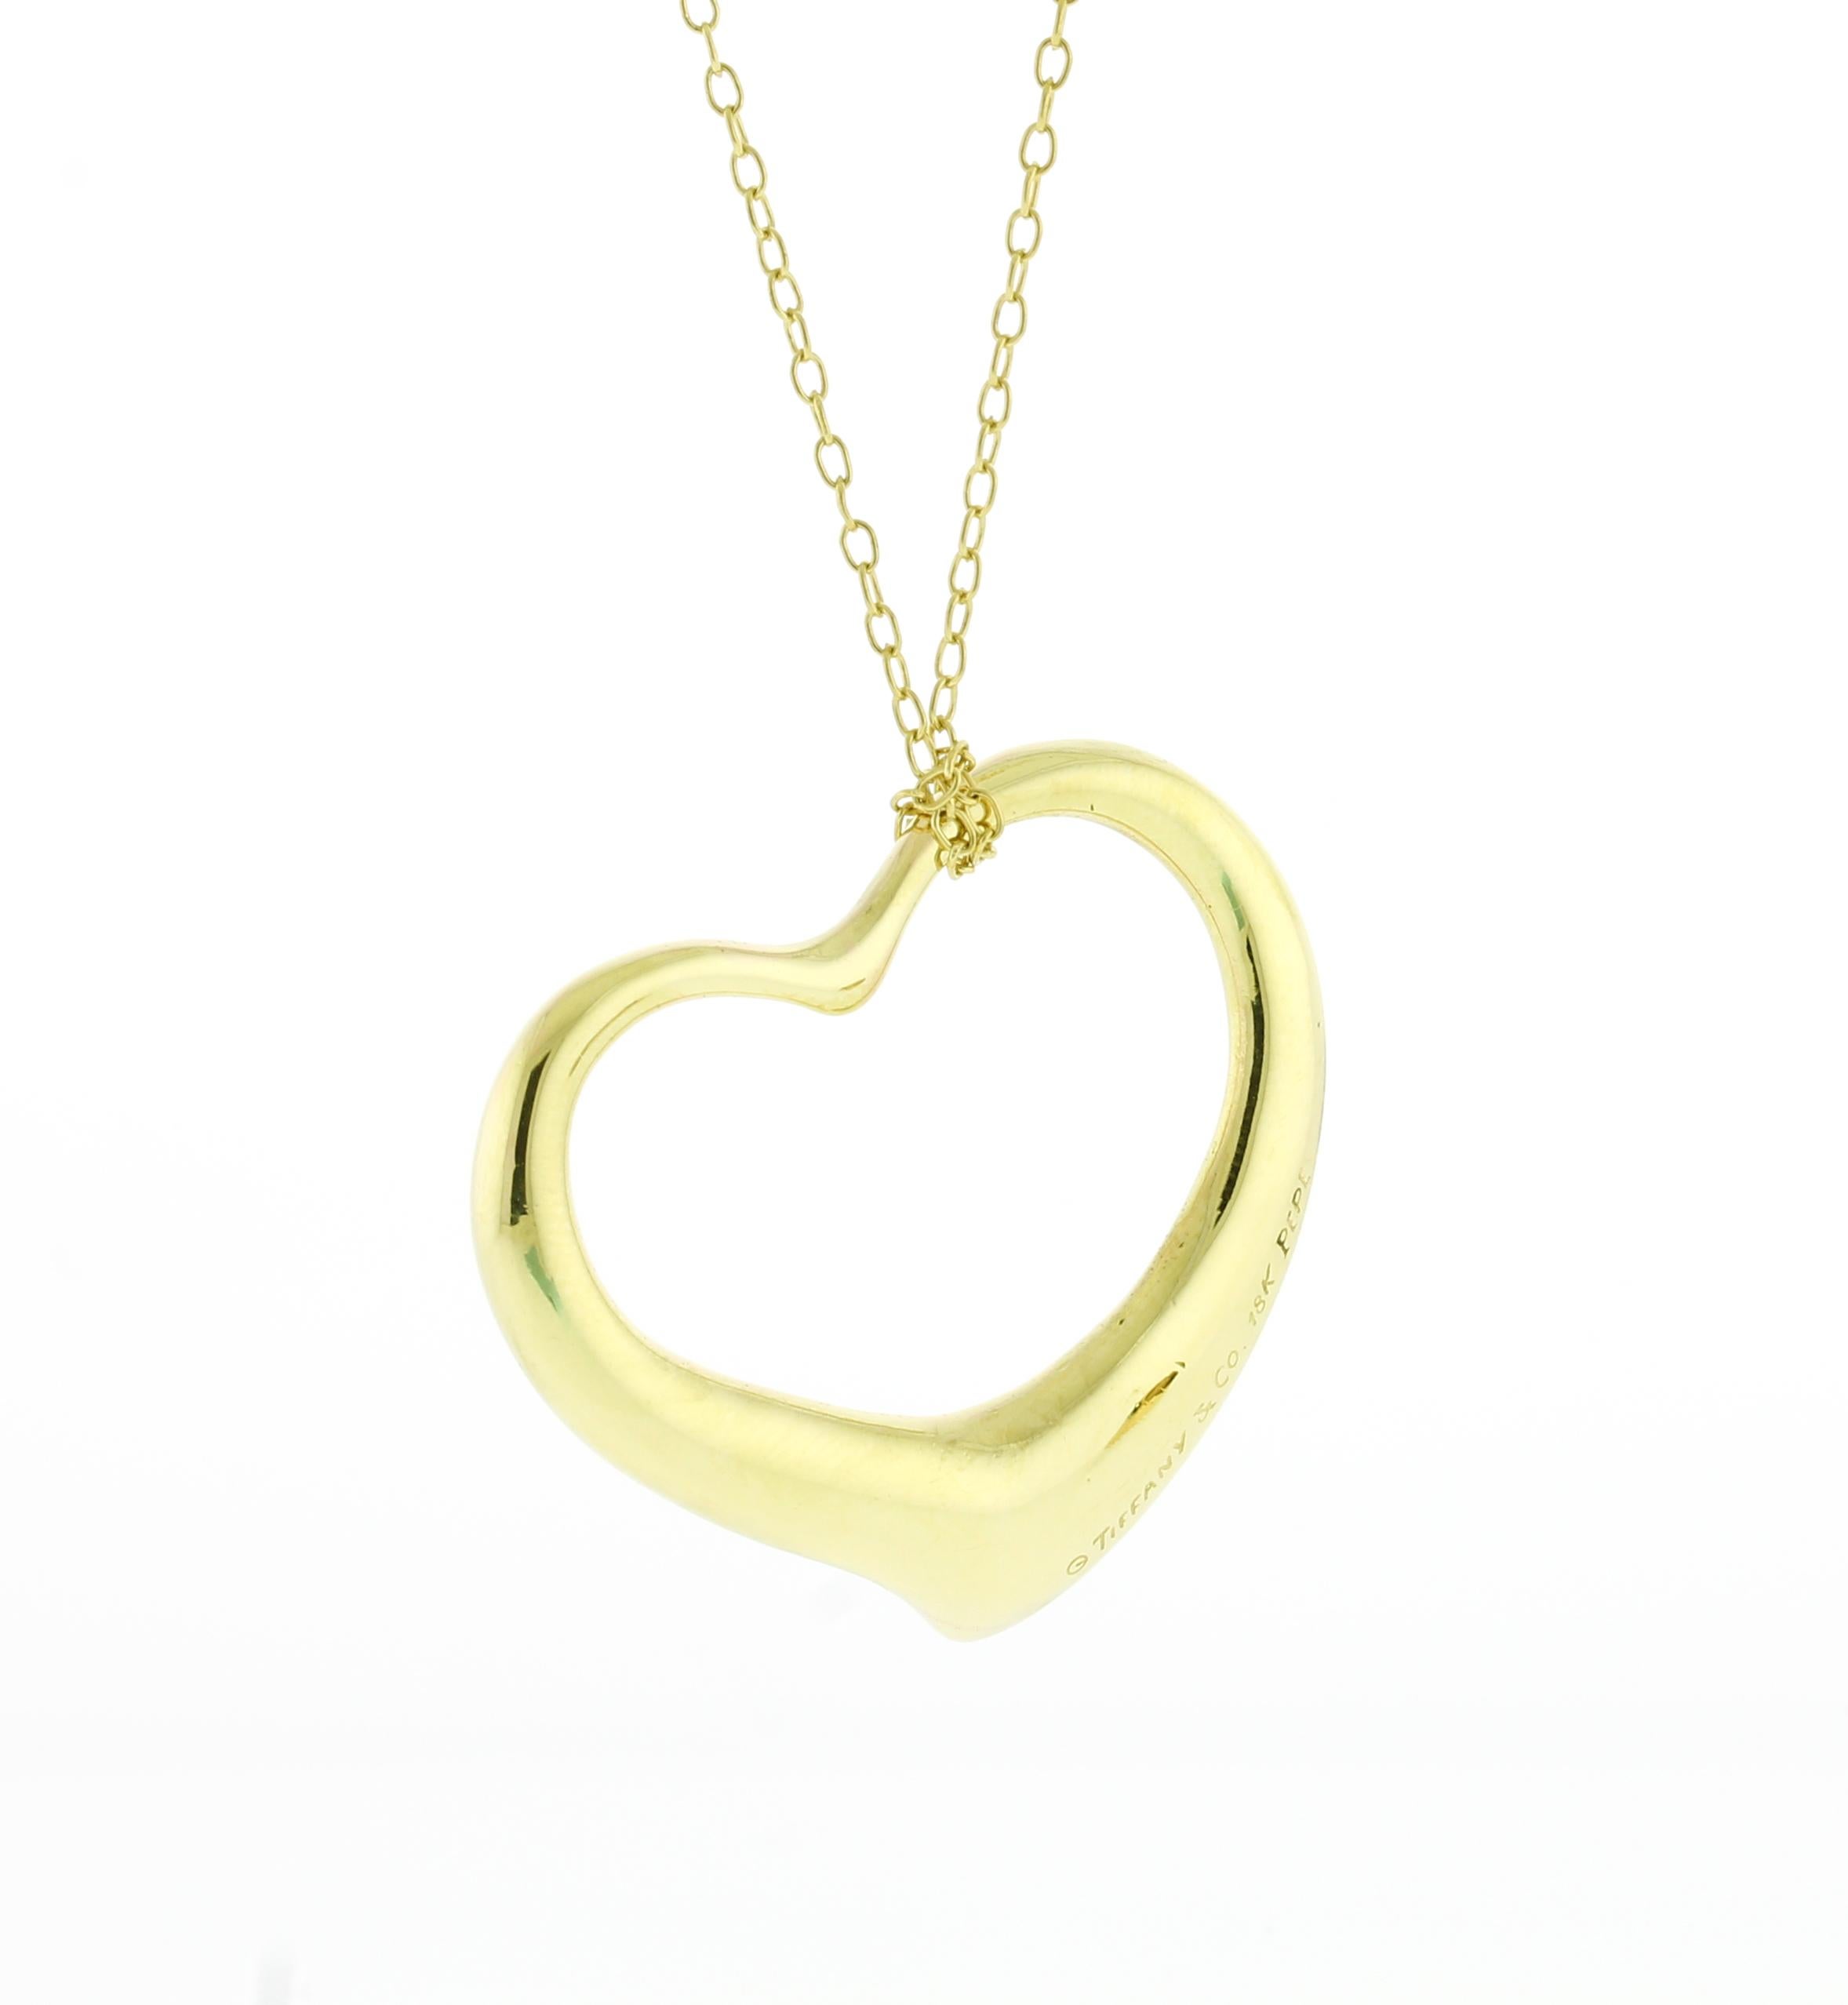 Elsa Peretti’s most celebrated icon, the open heart.  This is the large 18kt gold open heart on a 32″ chain. Original designs copyrighted by Elsa Peretti.
• Metal:18 Karat Yellow Gold
• Circa: 1990s
• Weight: 14.2 grams
• Dimensions: 1 3/8 x 1 3/8